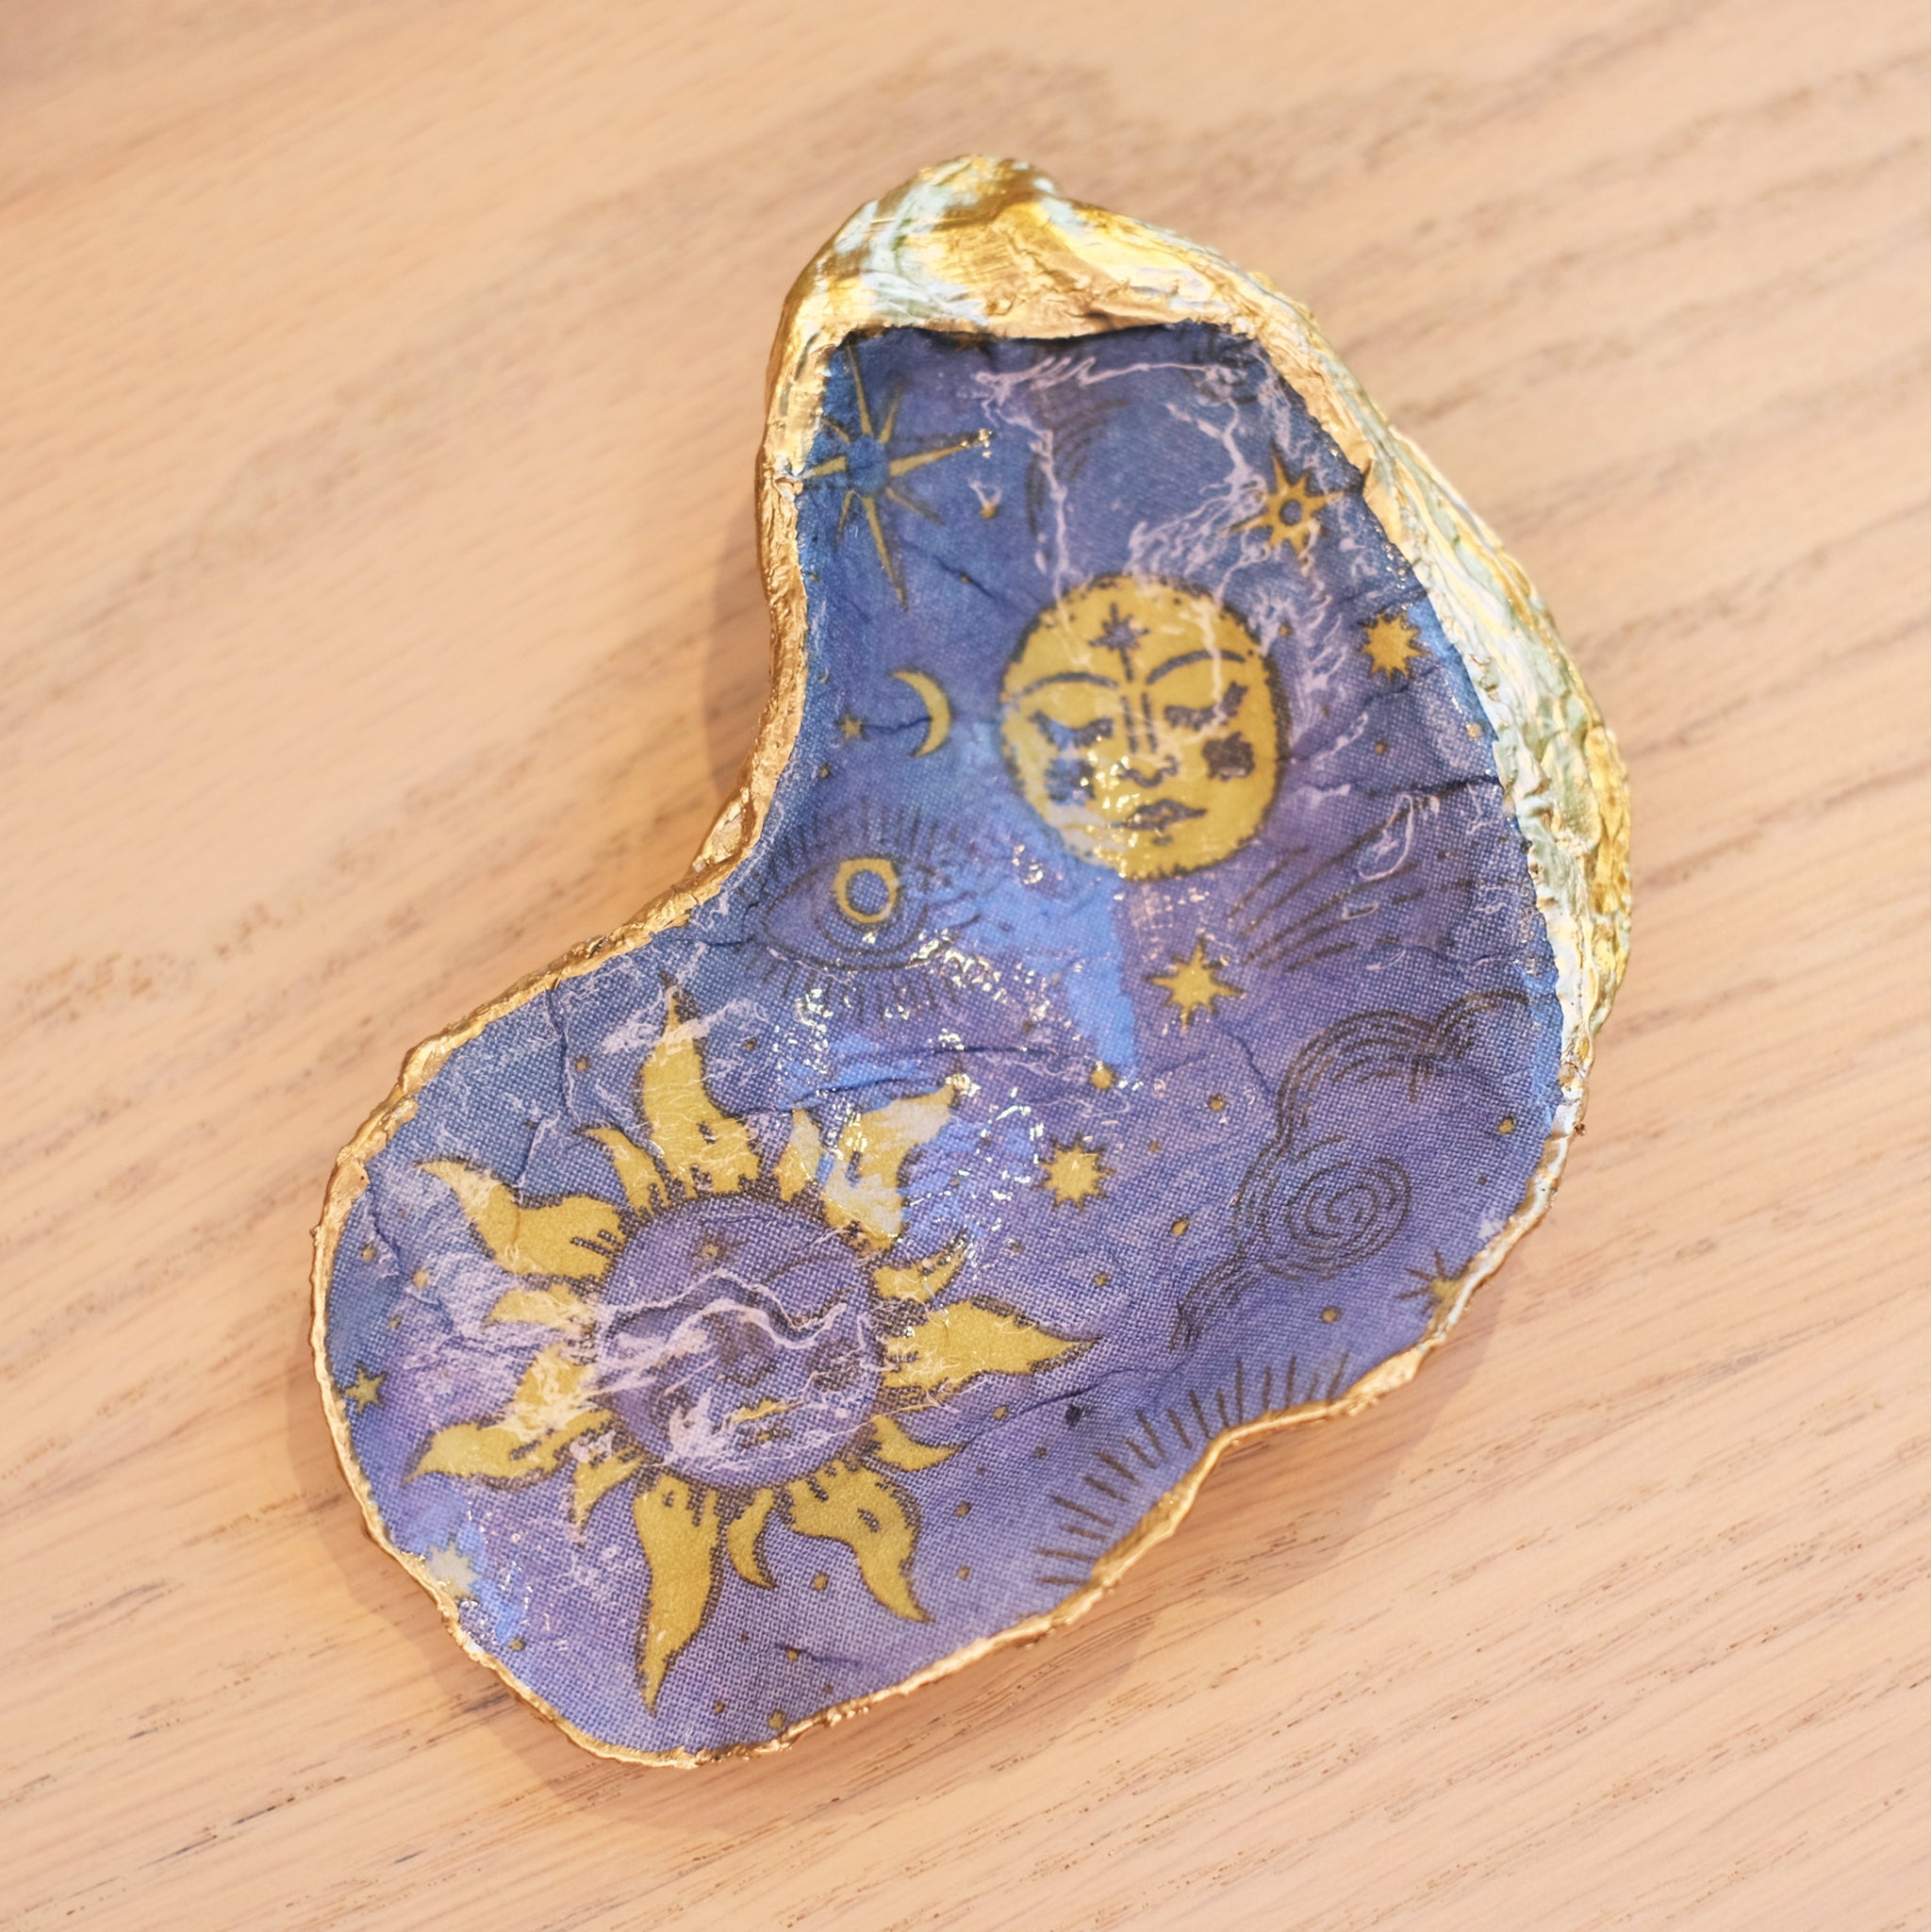 Decoupaged Local Oyster Shell